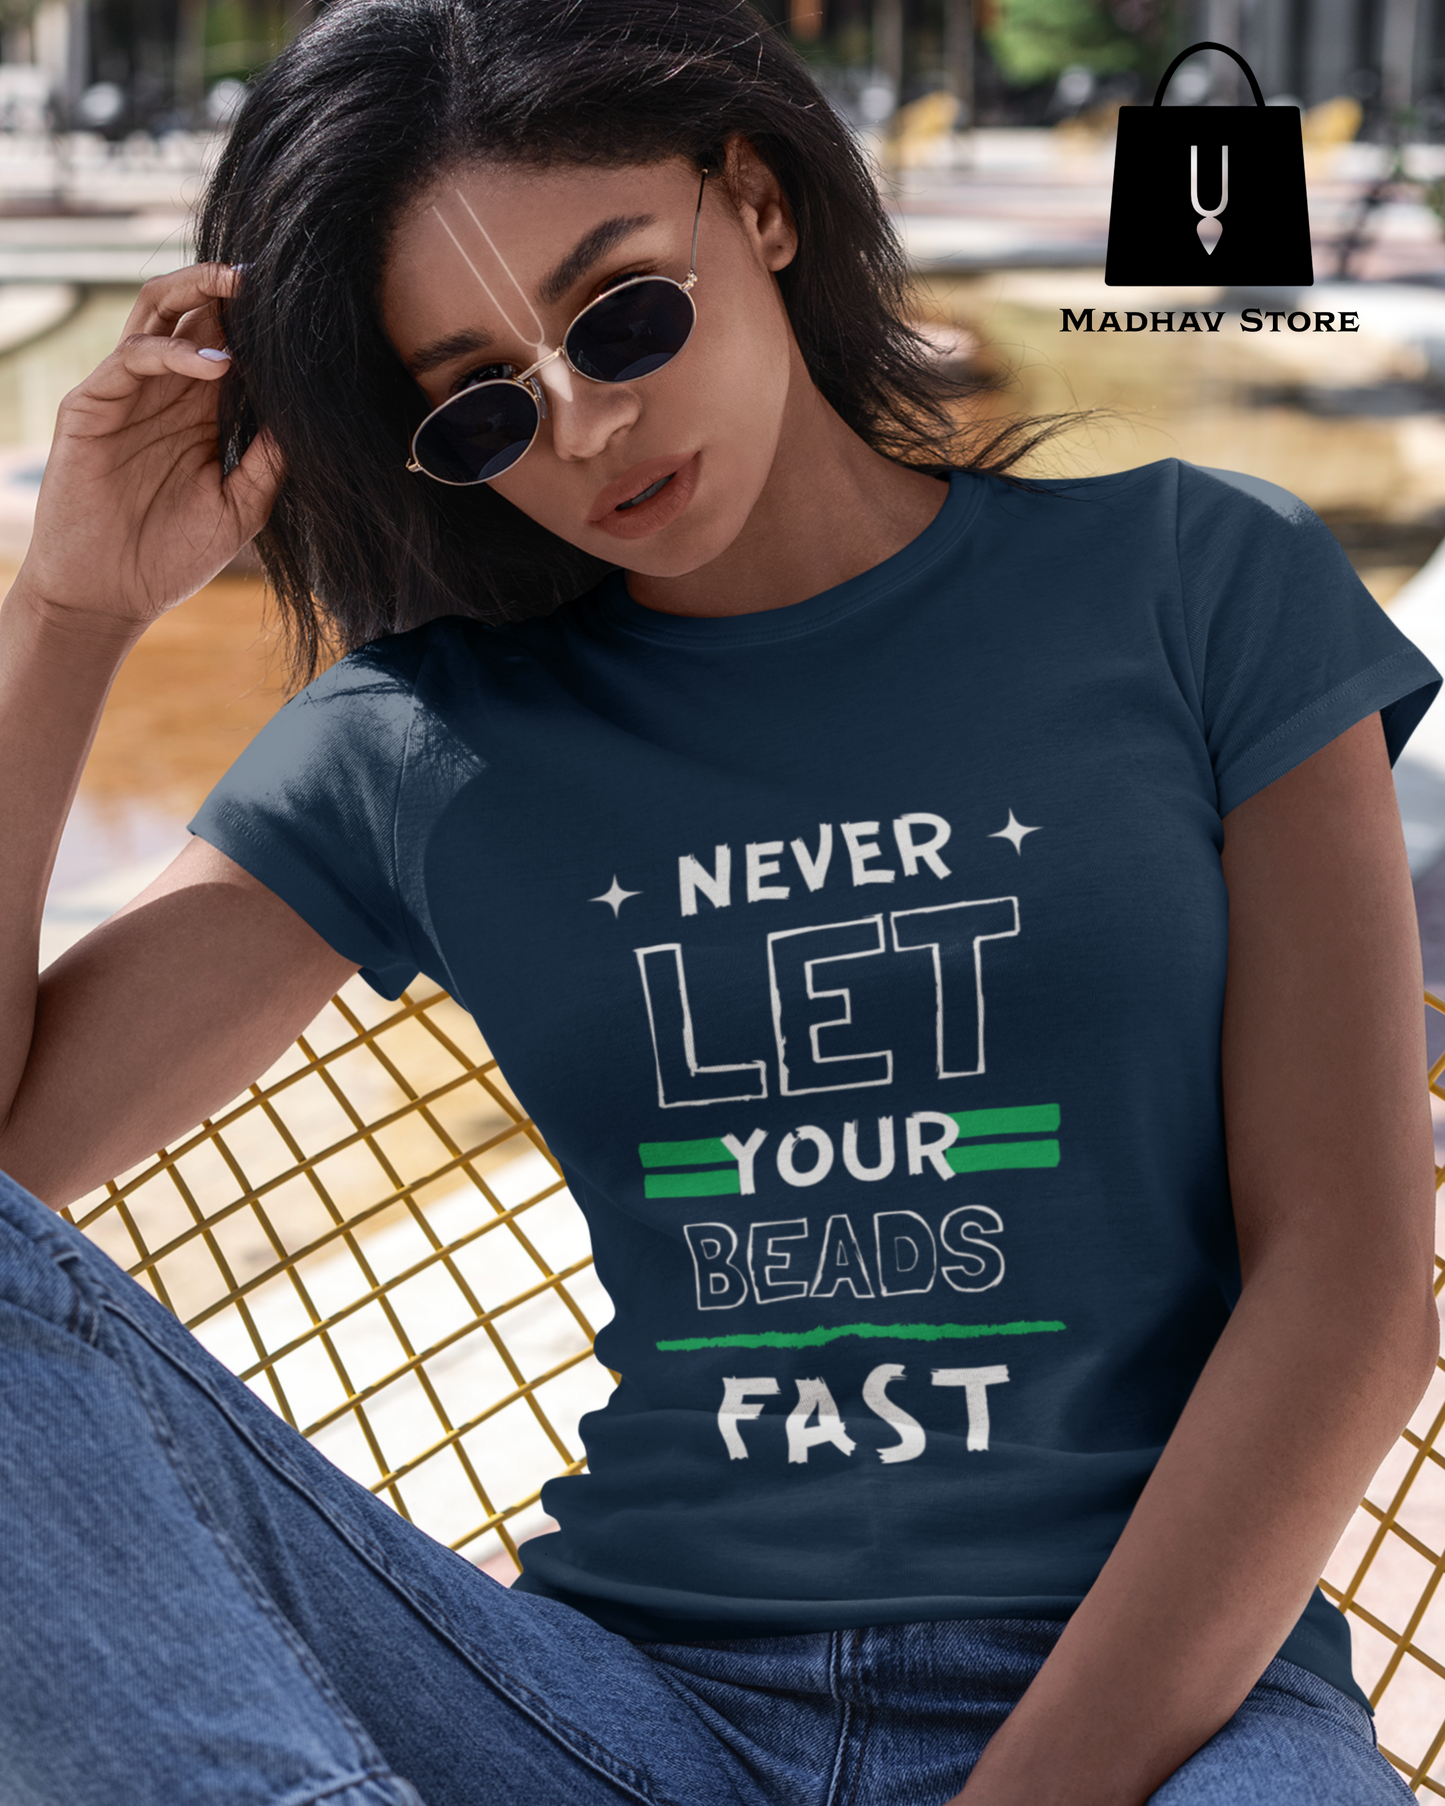 Never Let Your Beads Fast Tshirt for Women